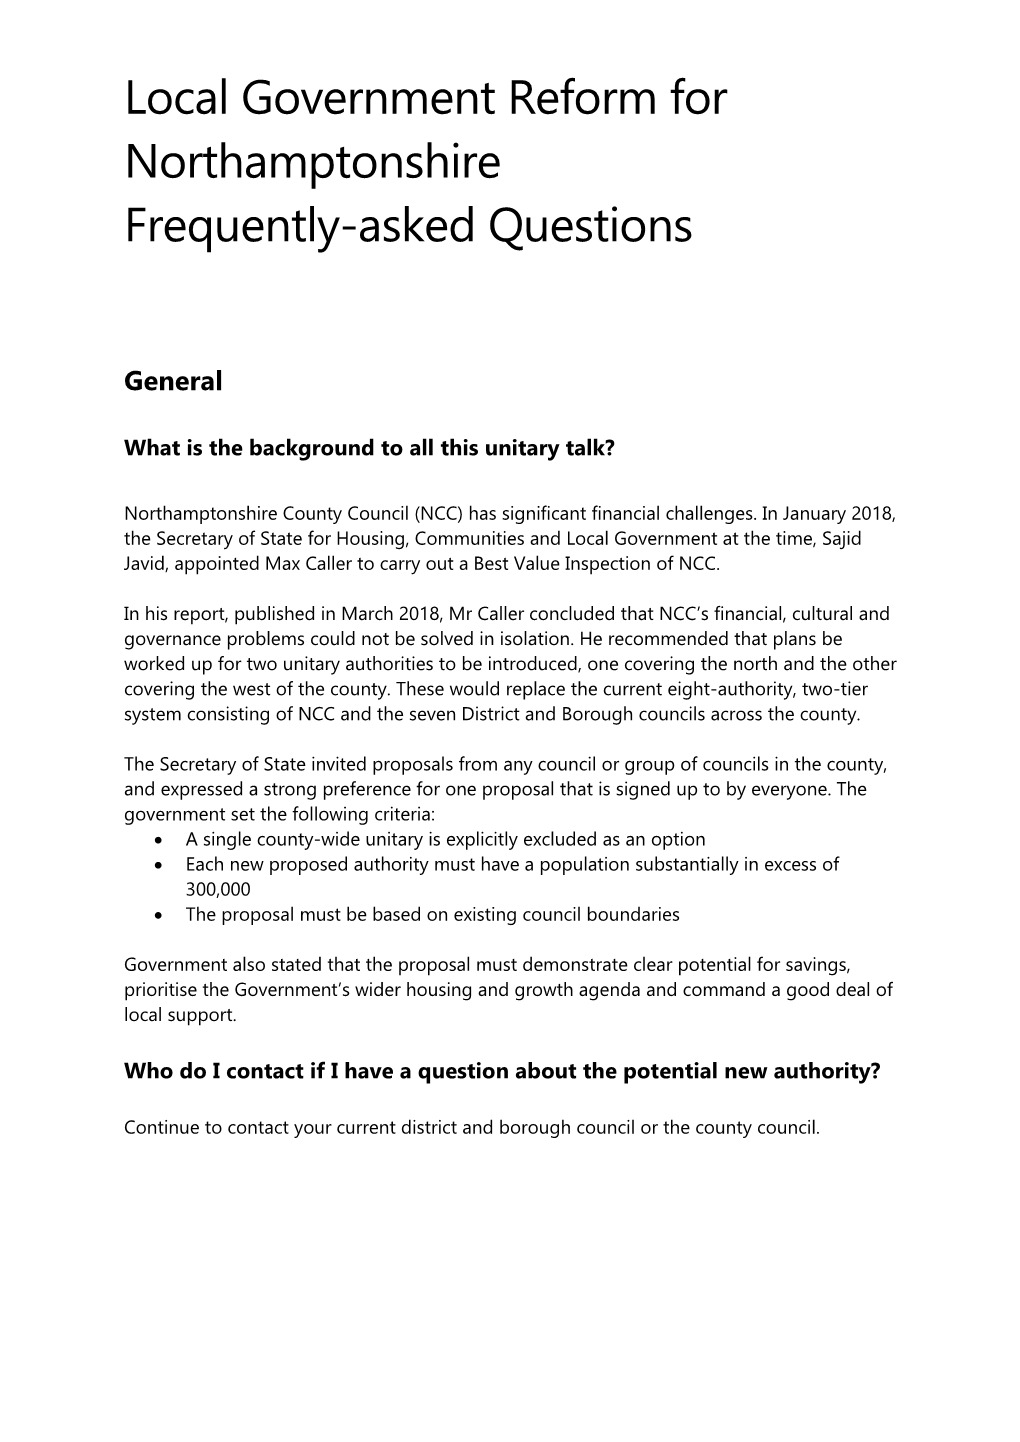 Local Government Reform for Northamptonshire Frequently-Asked Questions